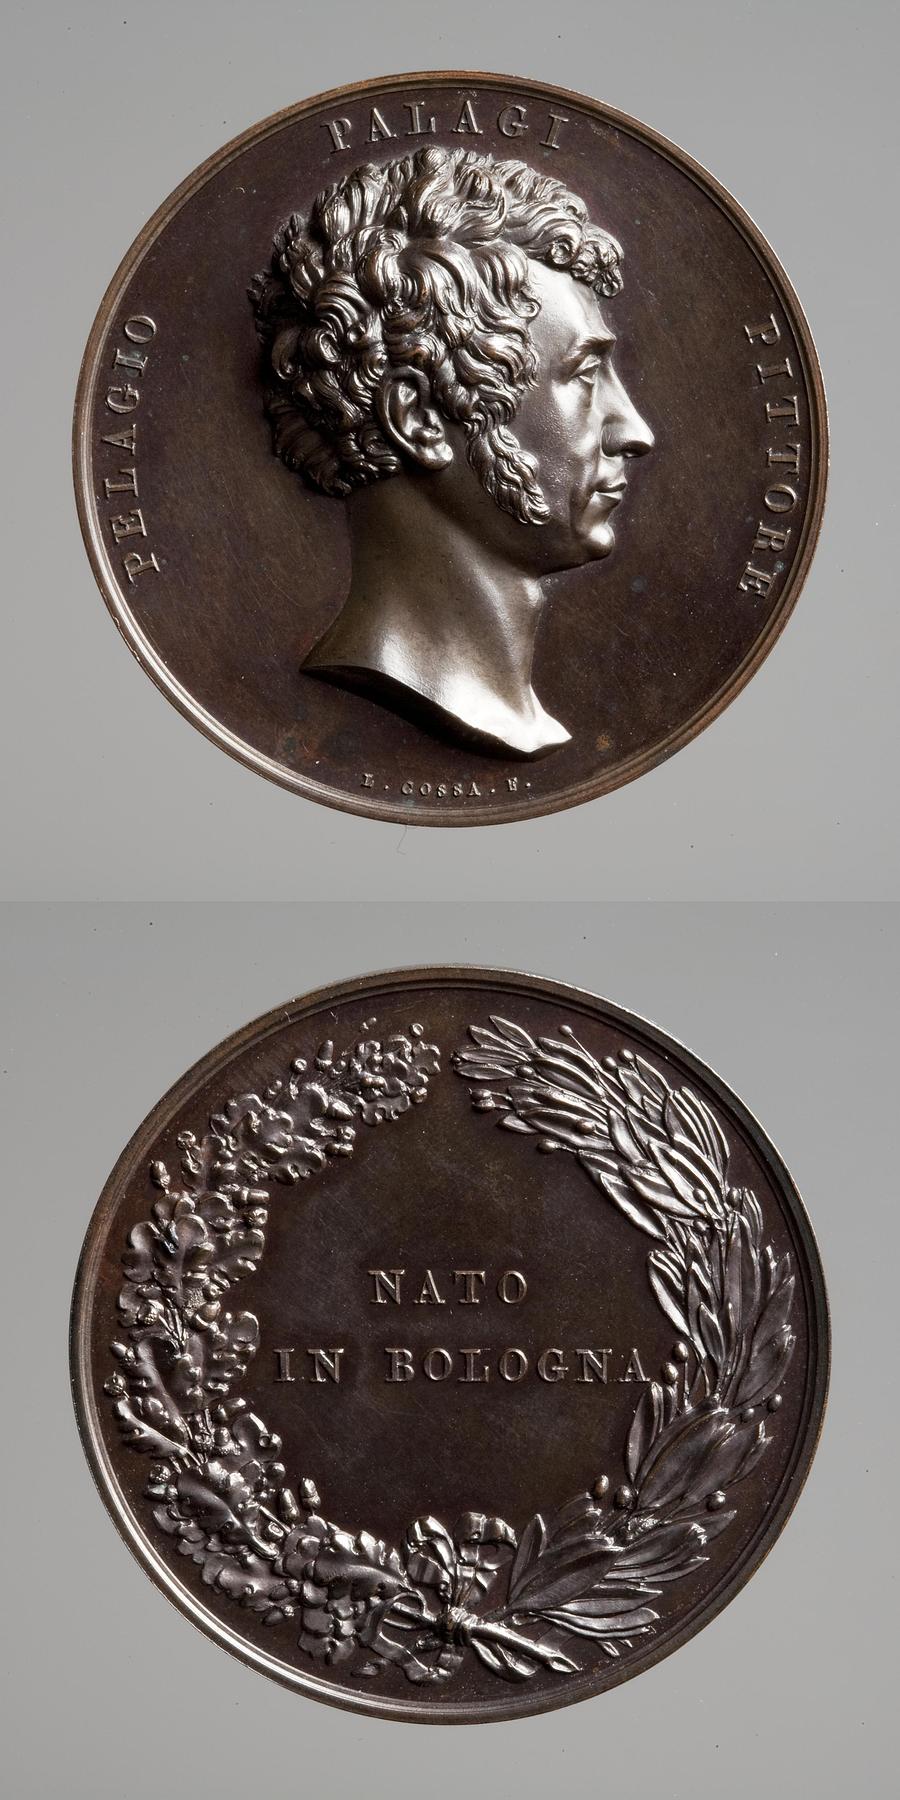 Medal obverse: Pelagio Palagi. Medal reverse: Inscription and a wreath made of oak and laurel branches, F57